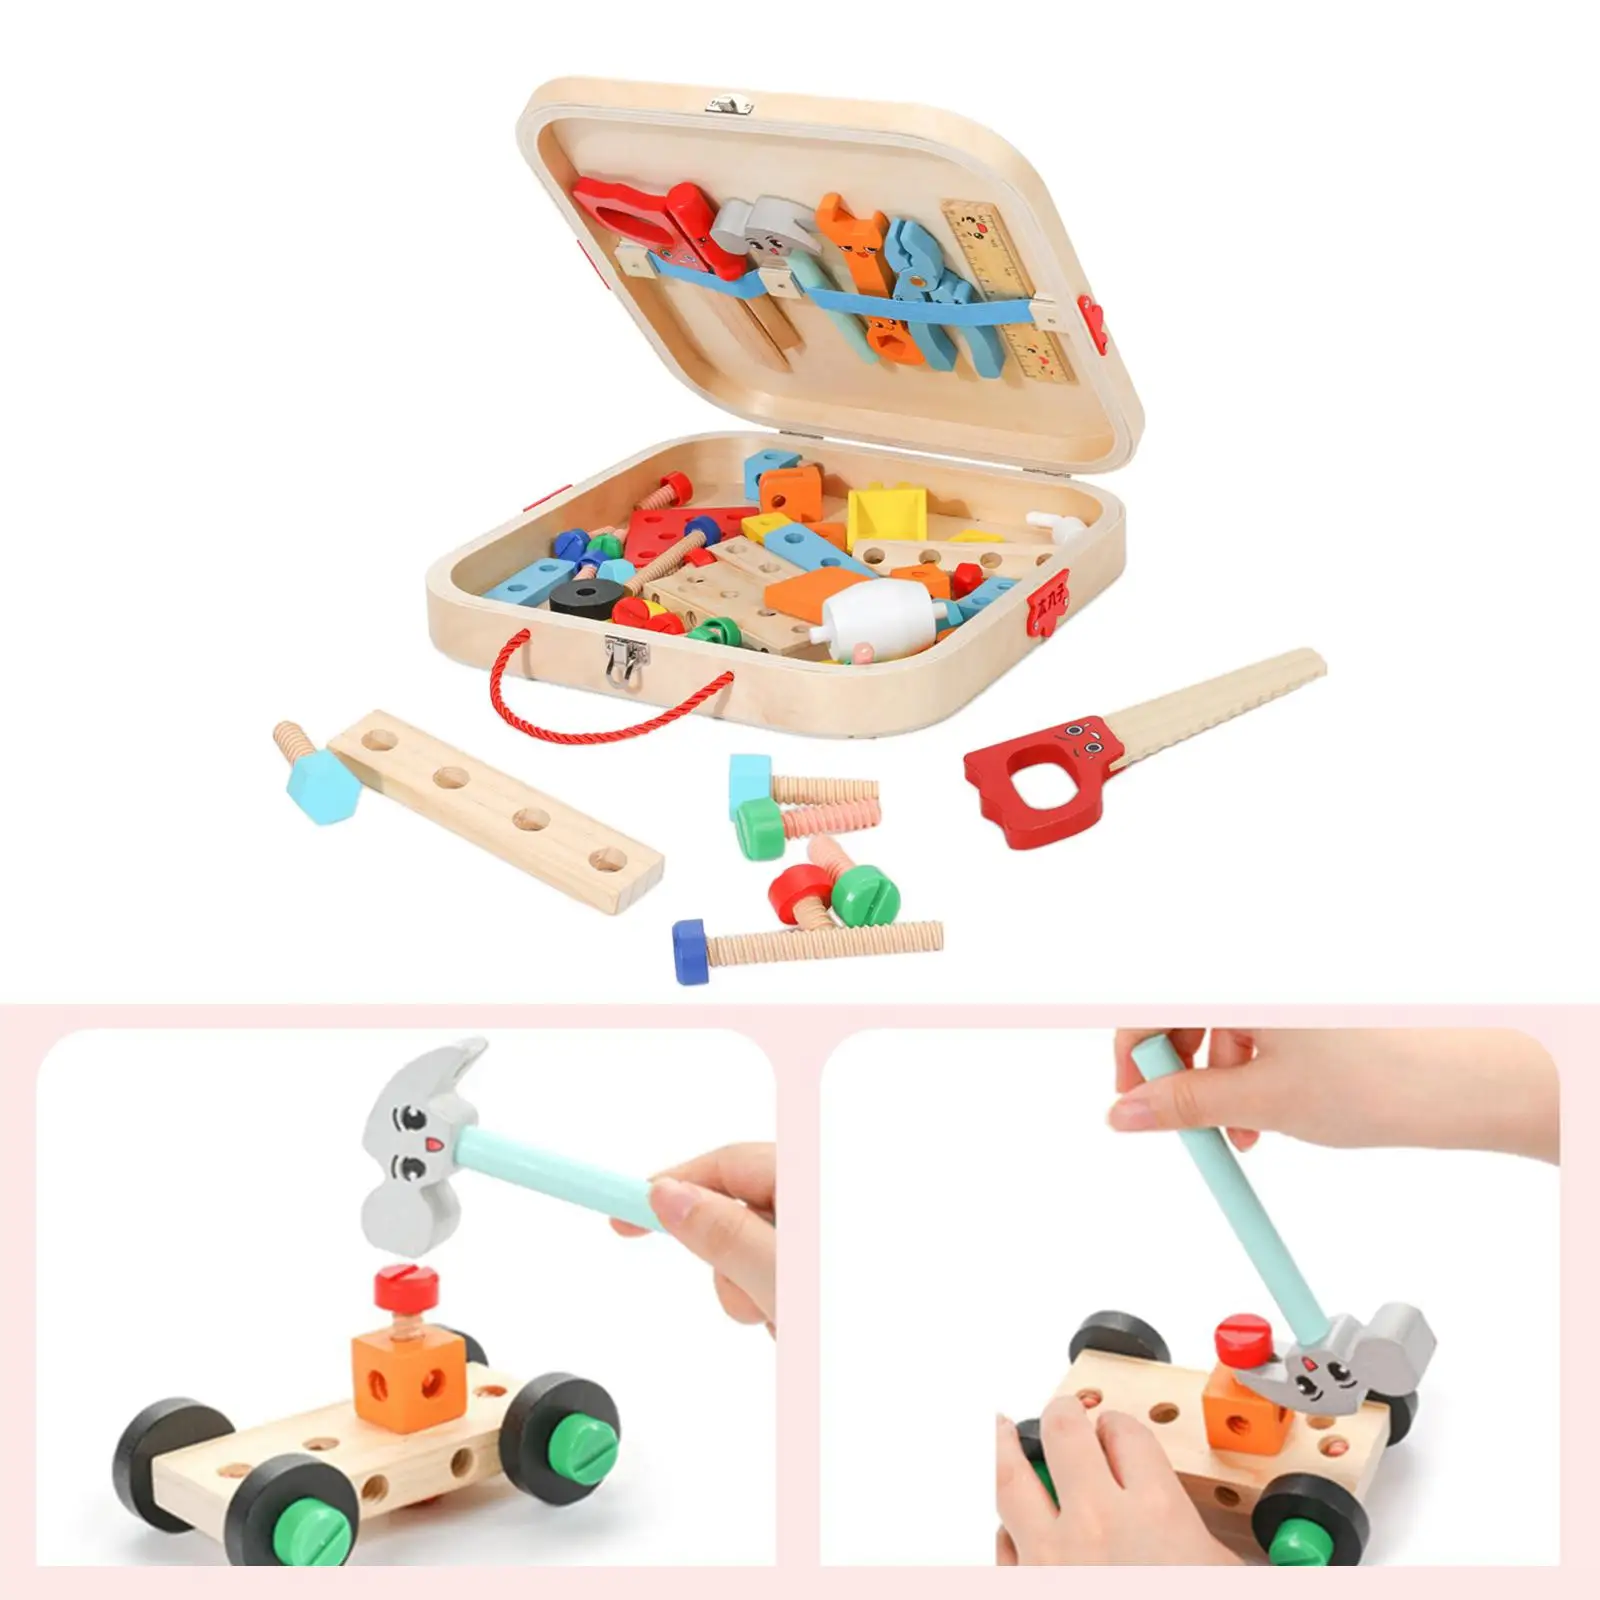 Kids Tool Set Construction Toy Wooden Toddlers Tools Set for Bedroom Birthday Gift Home DIY 2 3 4 5 6 Year Old Boys and Girls